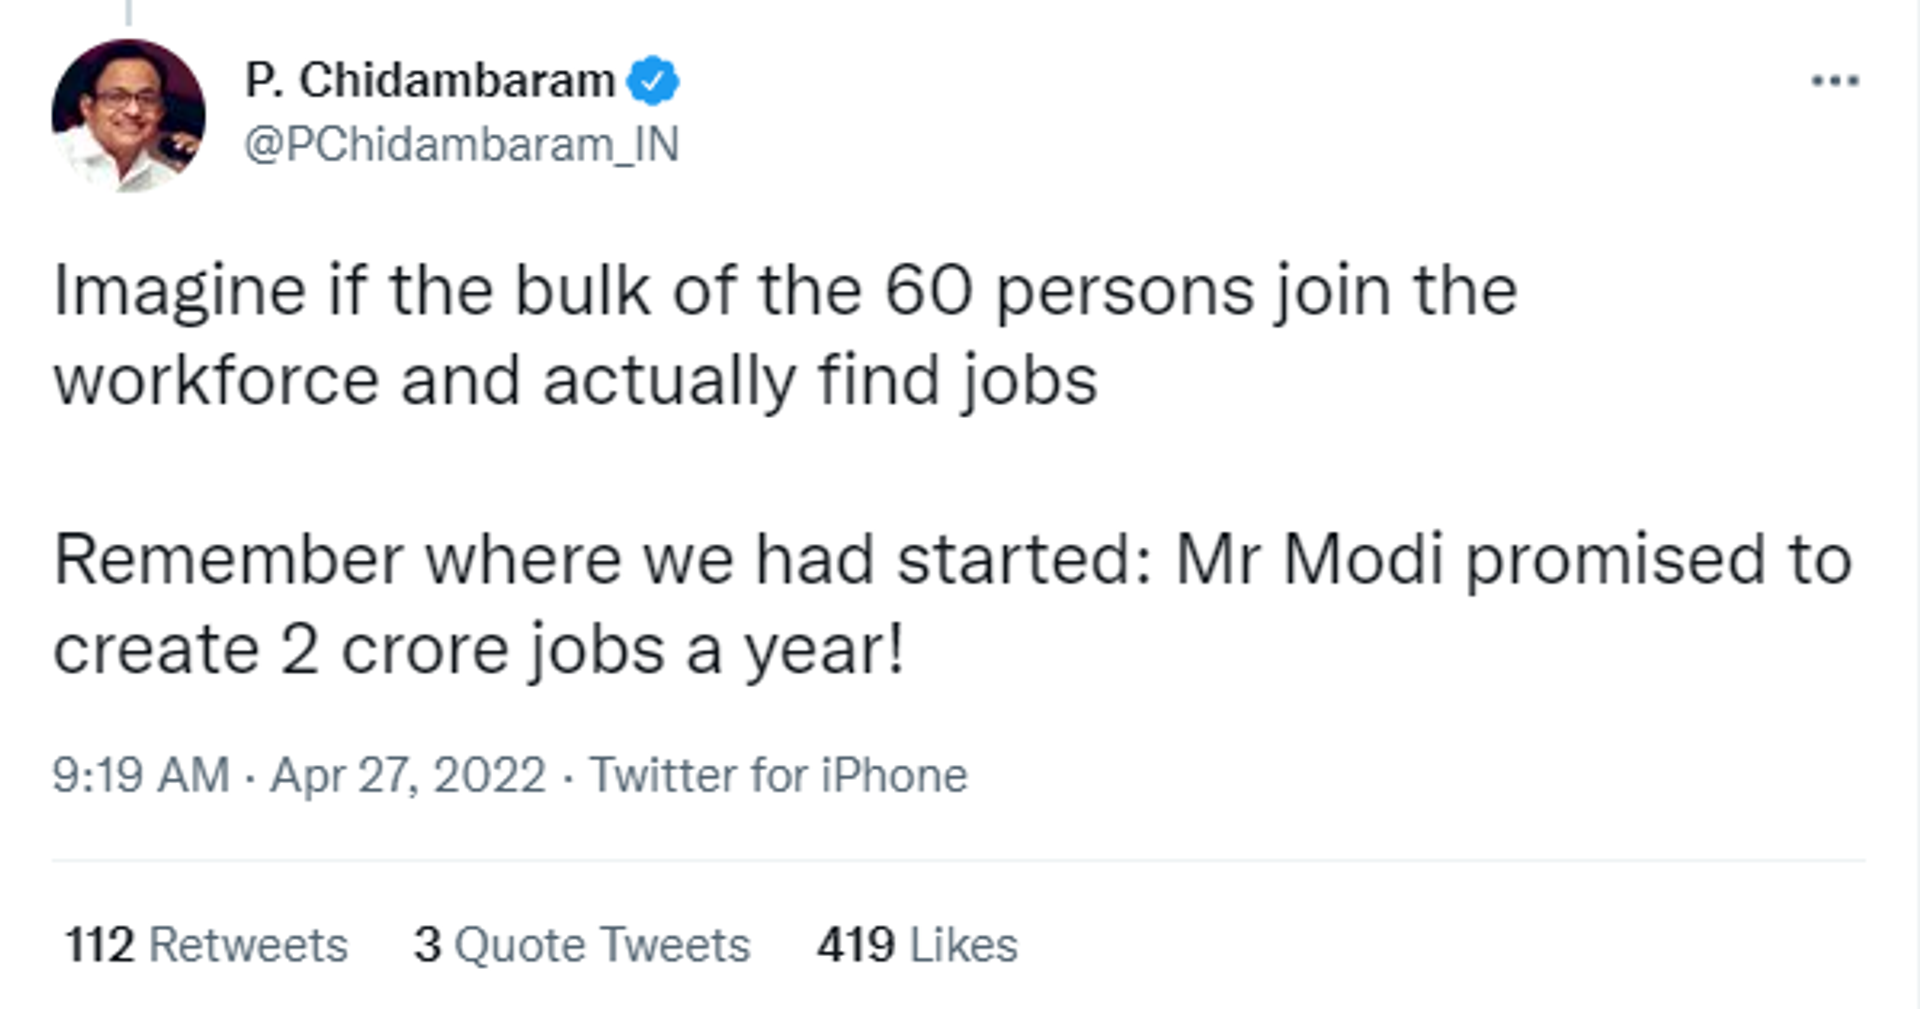 P. Chidambaram Takes a Jibe at PM Modi over His Promise to Provide Jobs to 20 Million People - Sputnik International, 1920, 27.04.2022